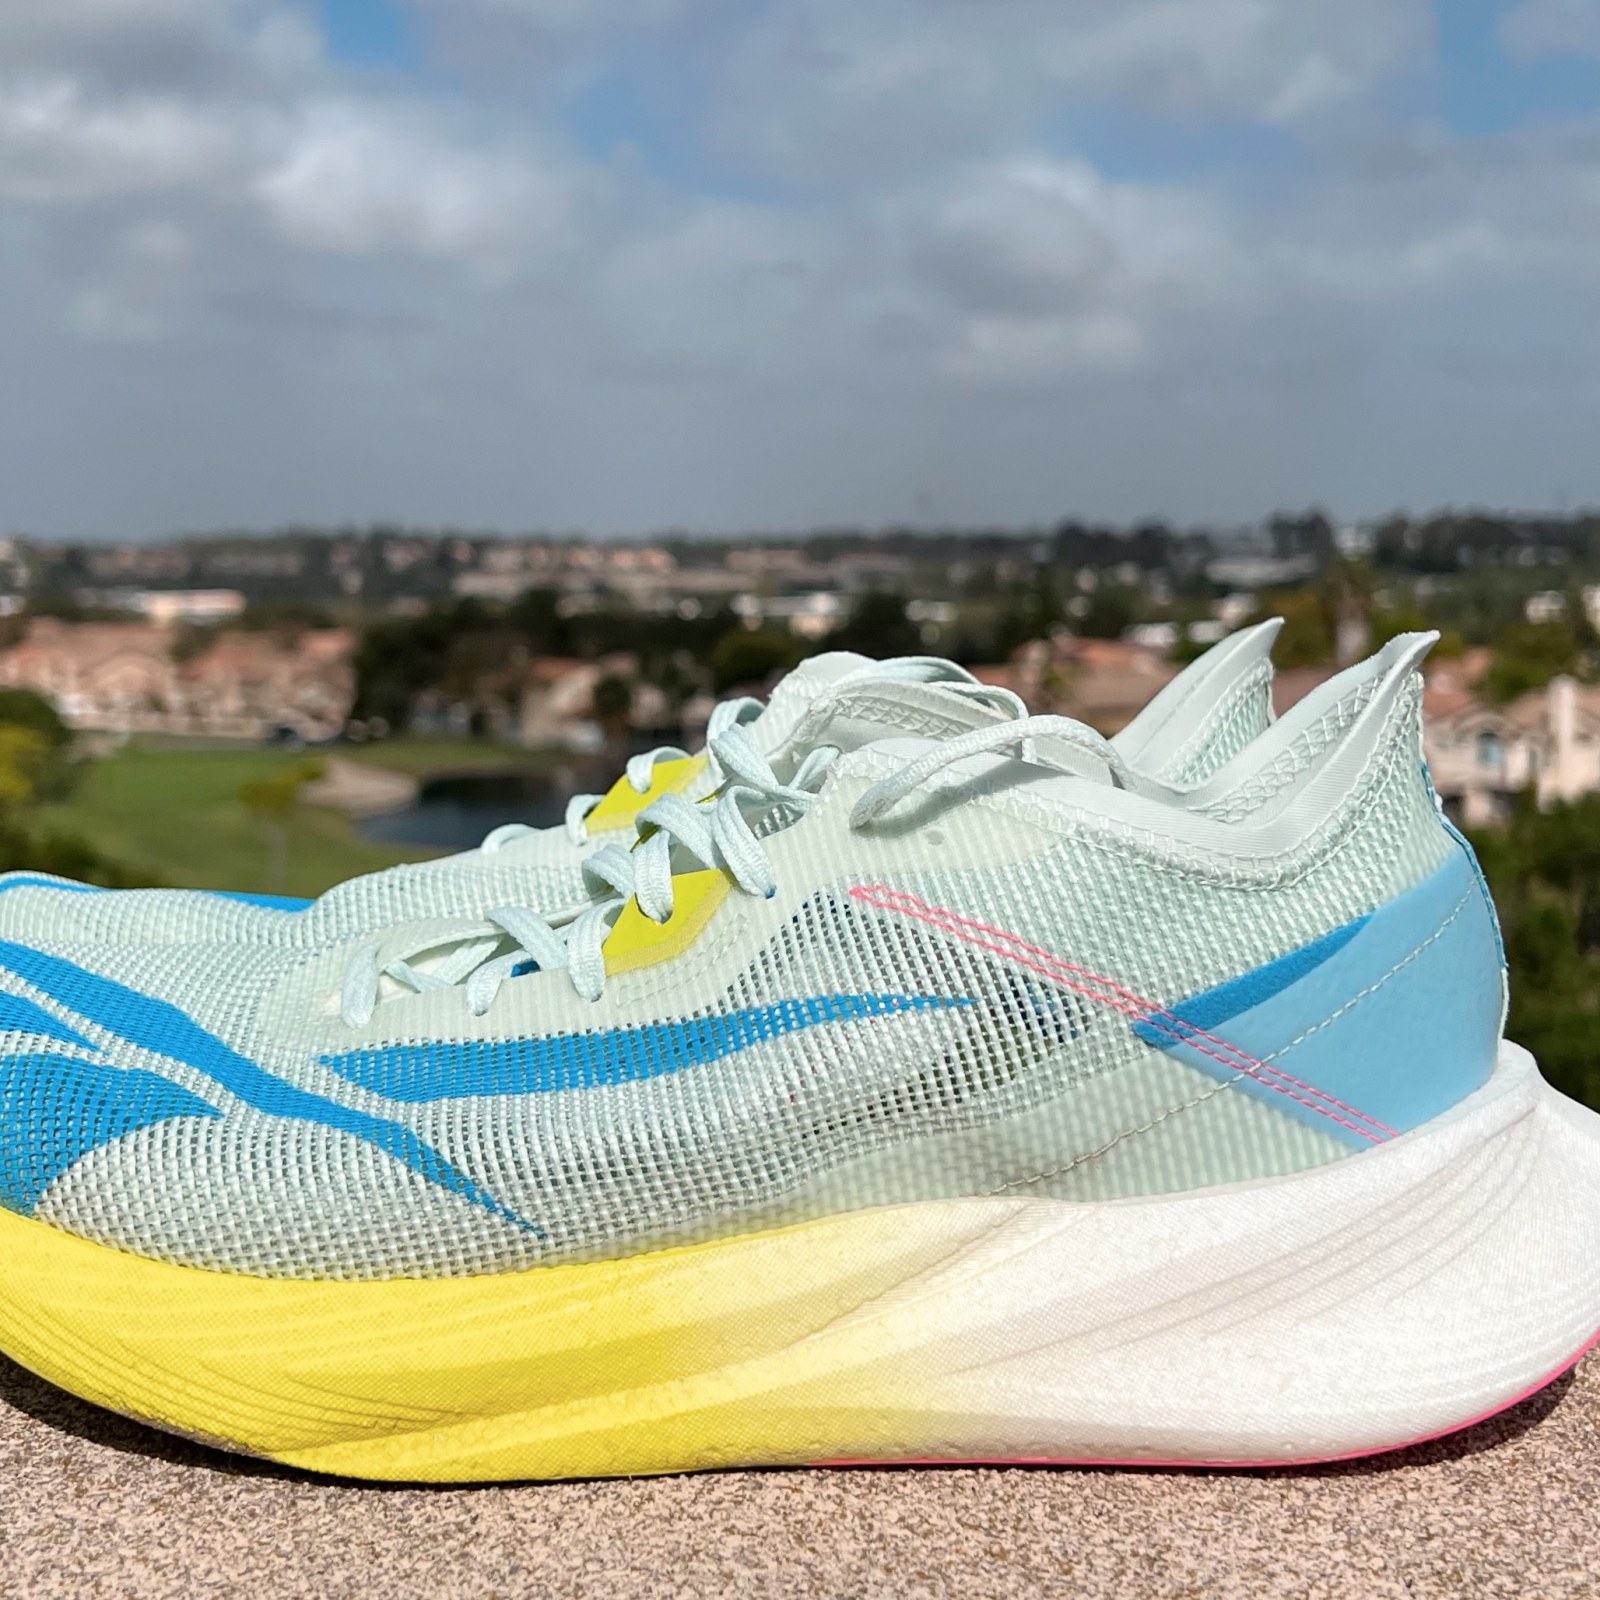 temblor Agrícola Cuarto A Tale of Two New Reebok Floatride Energy Running Shoes